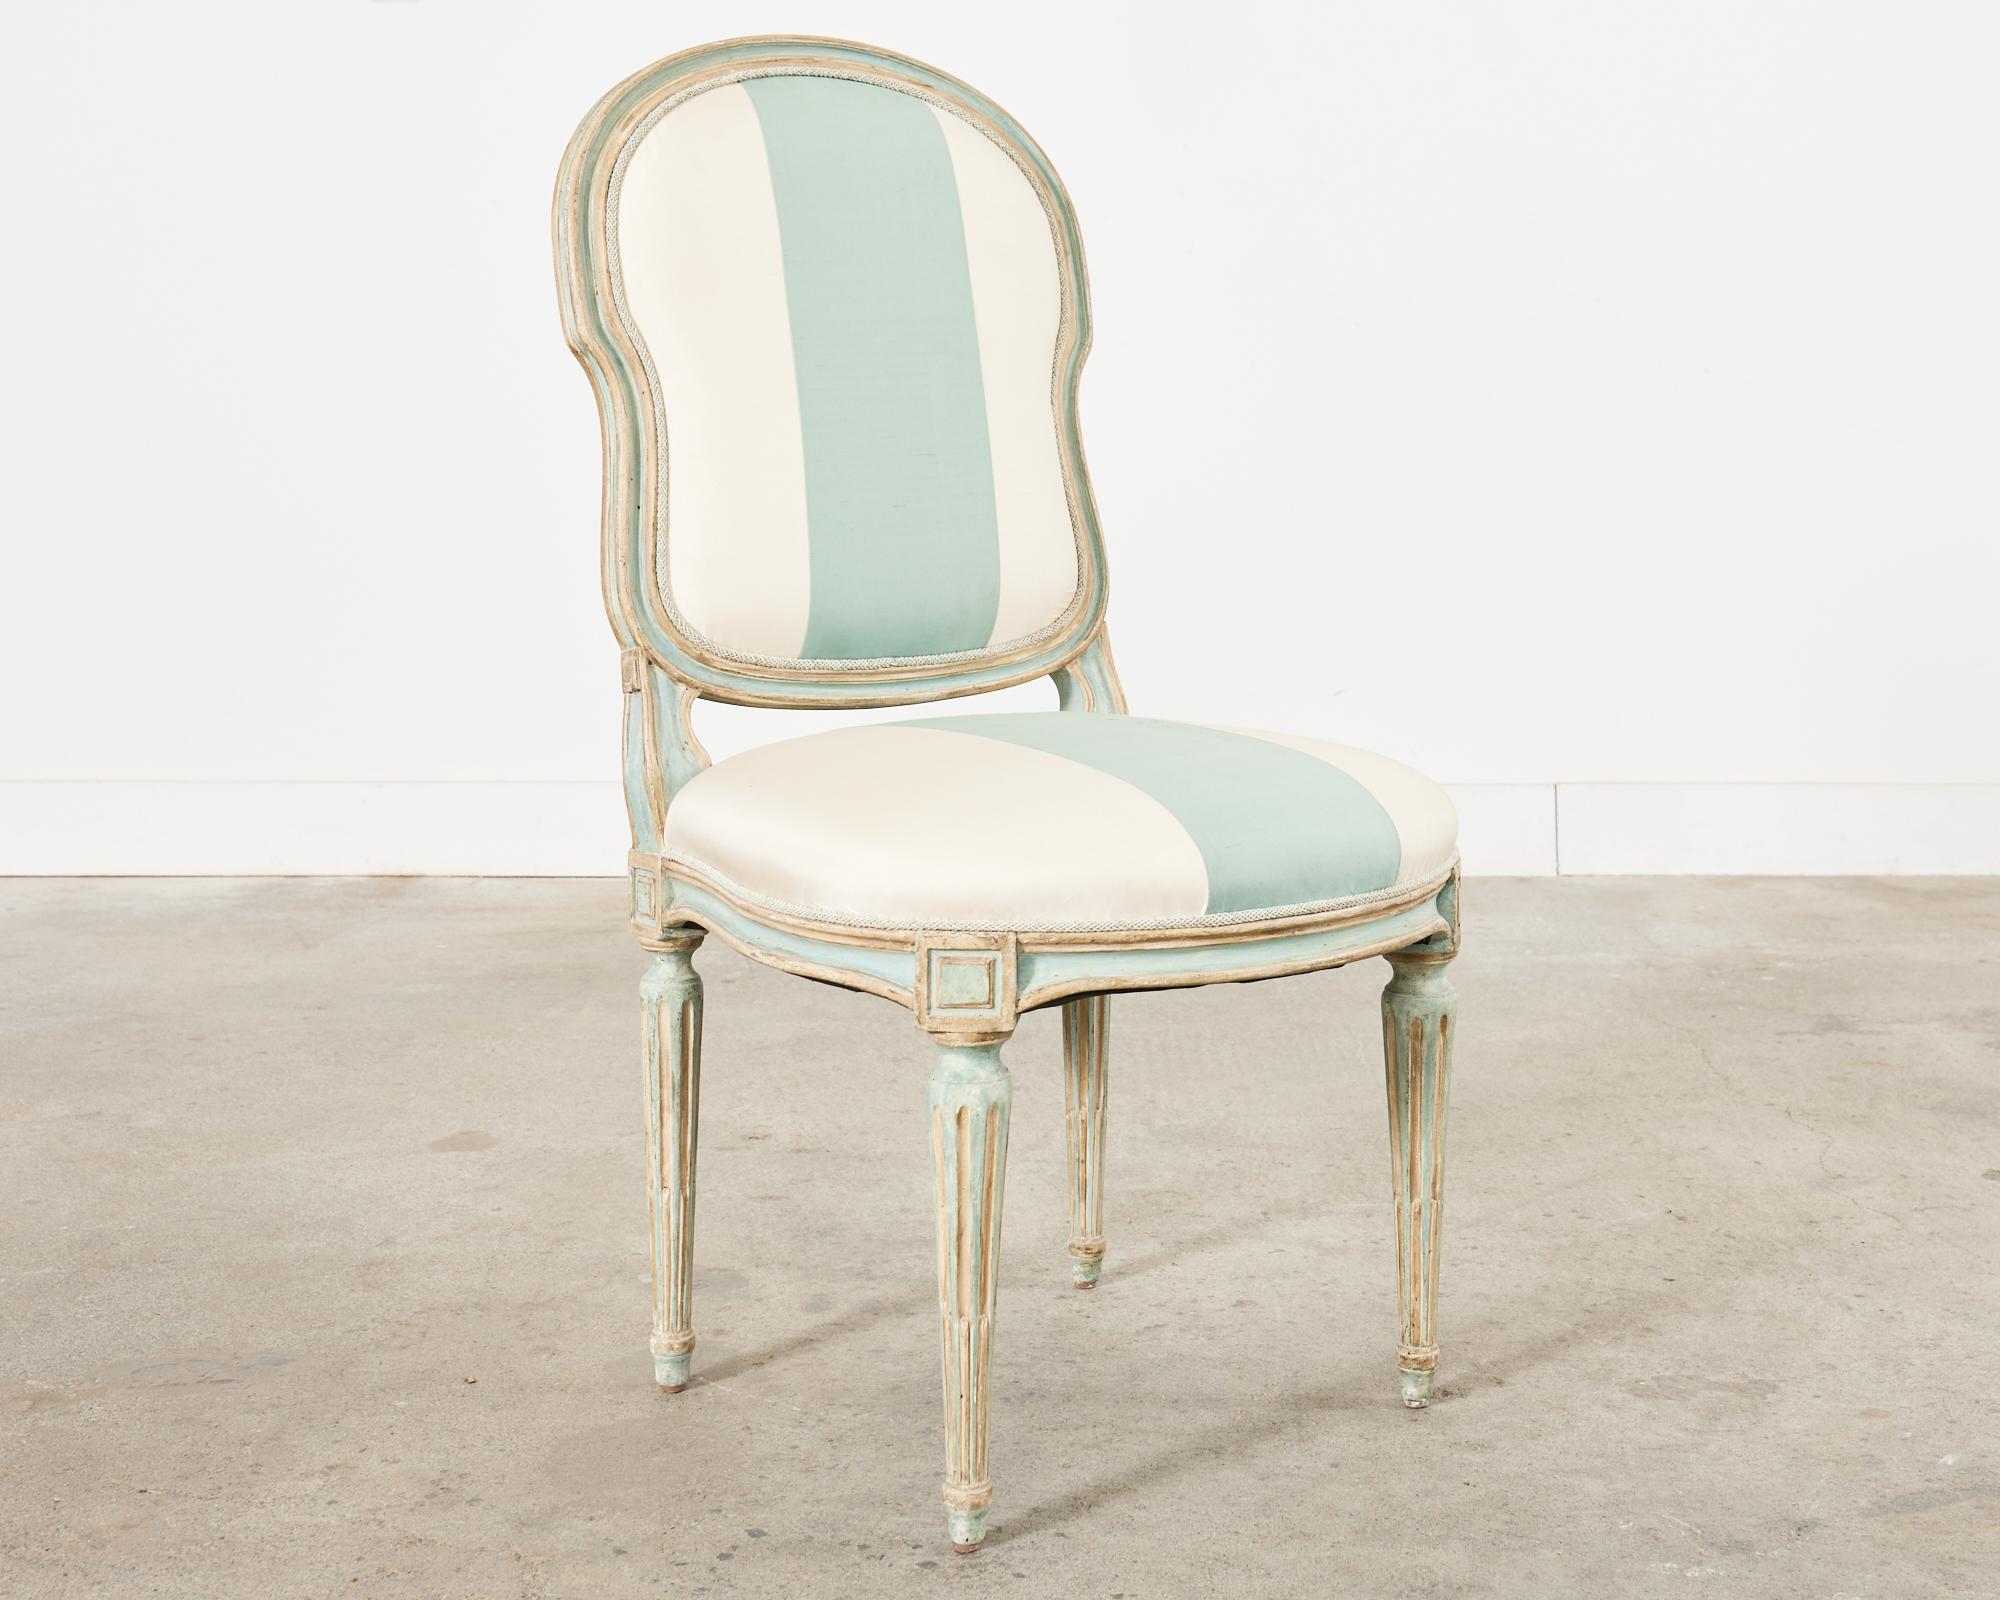 American Dennis & Leen Louis XVI Style Painted Dining Chair For Sale